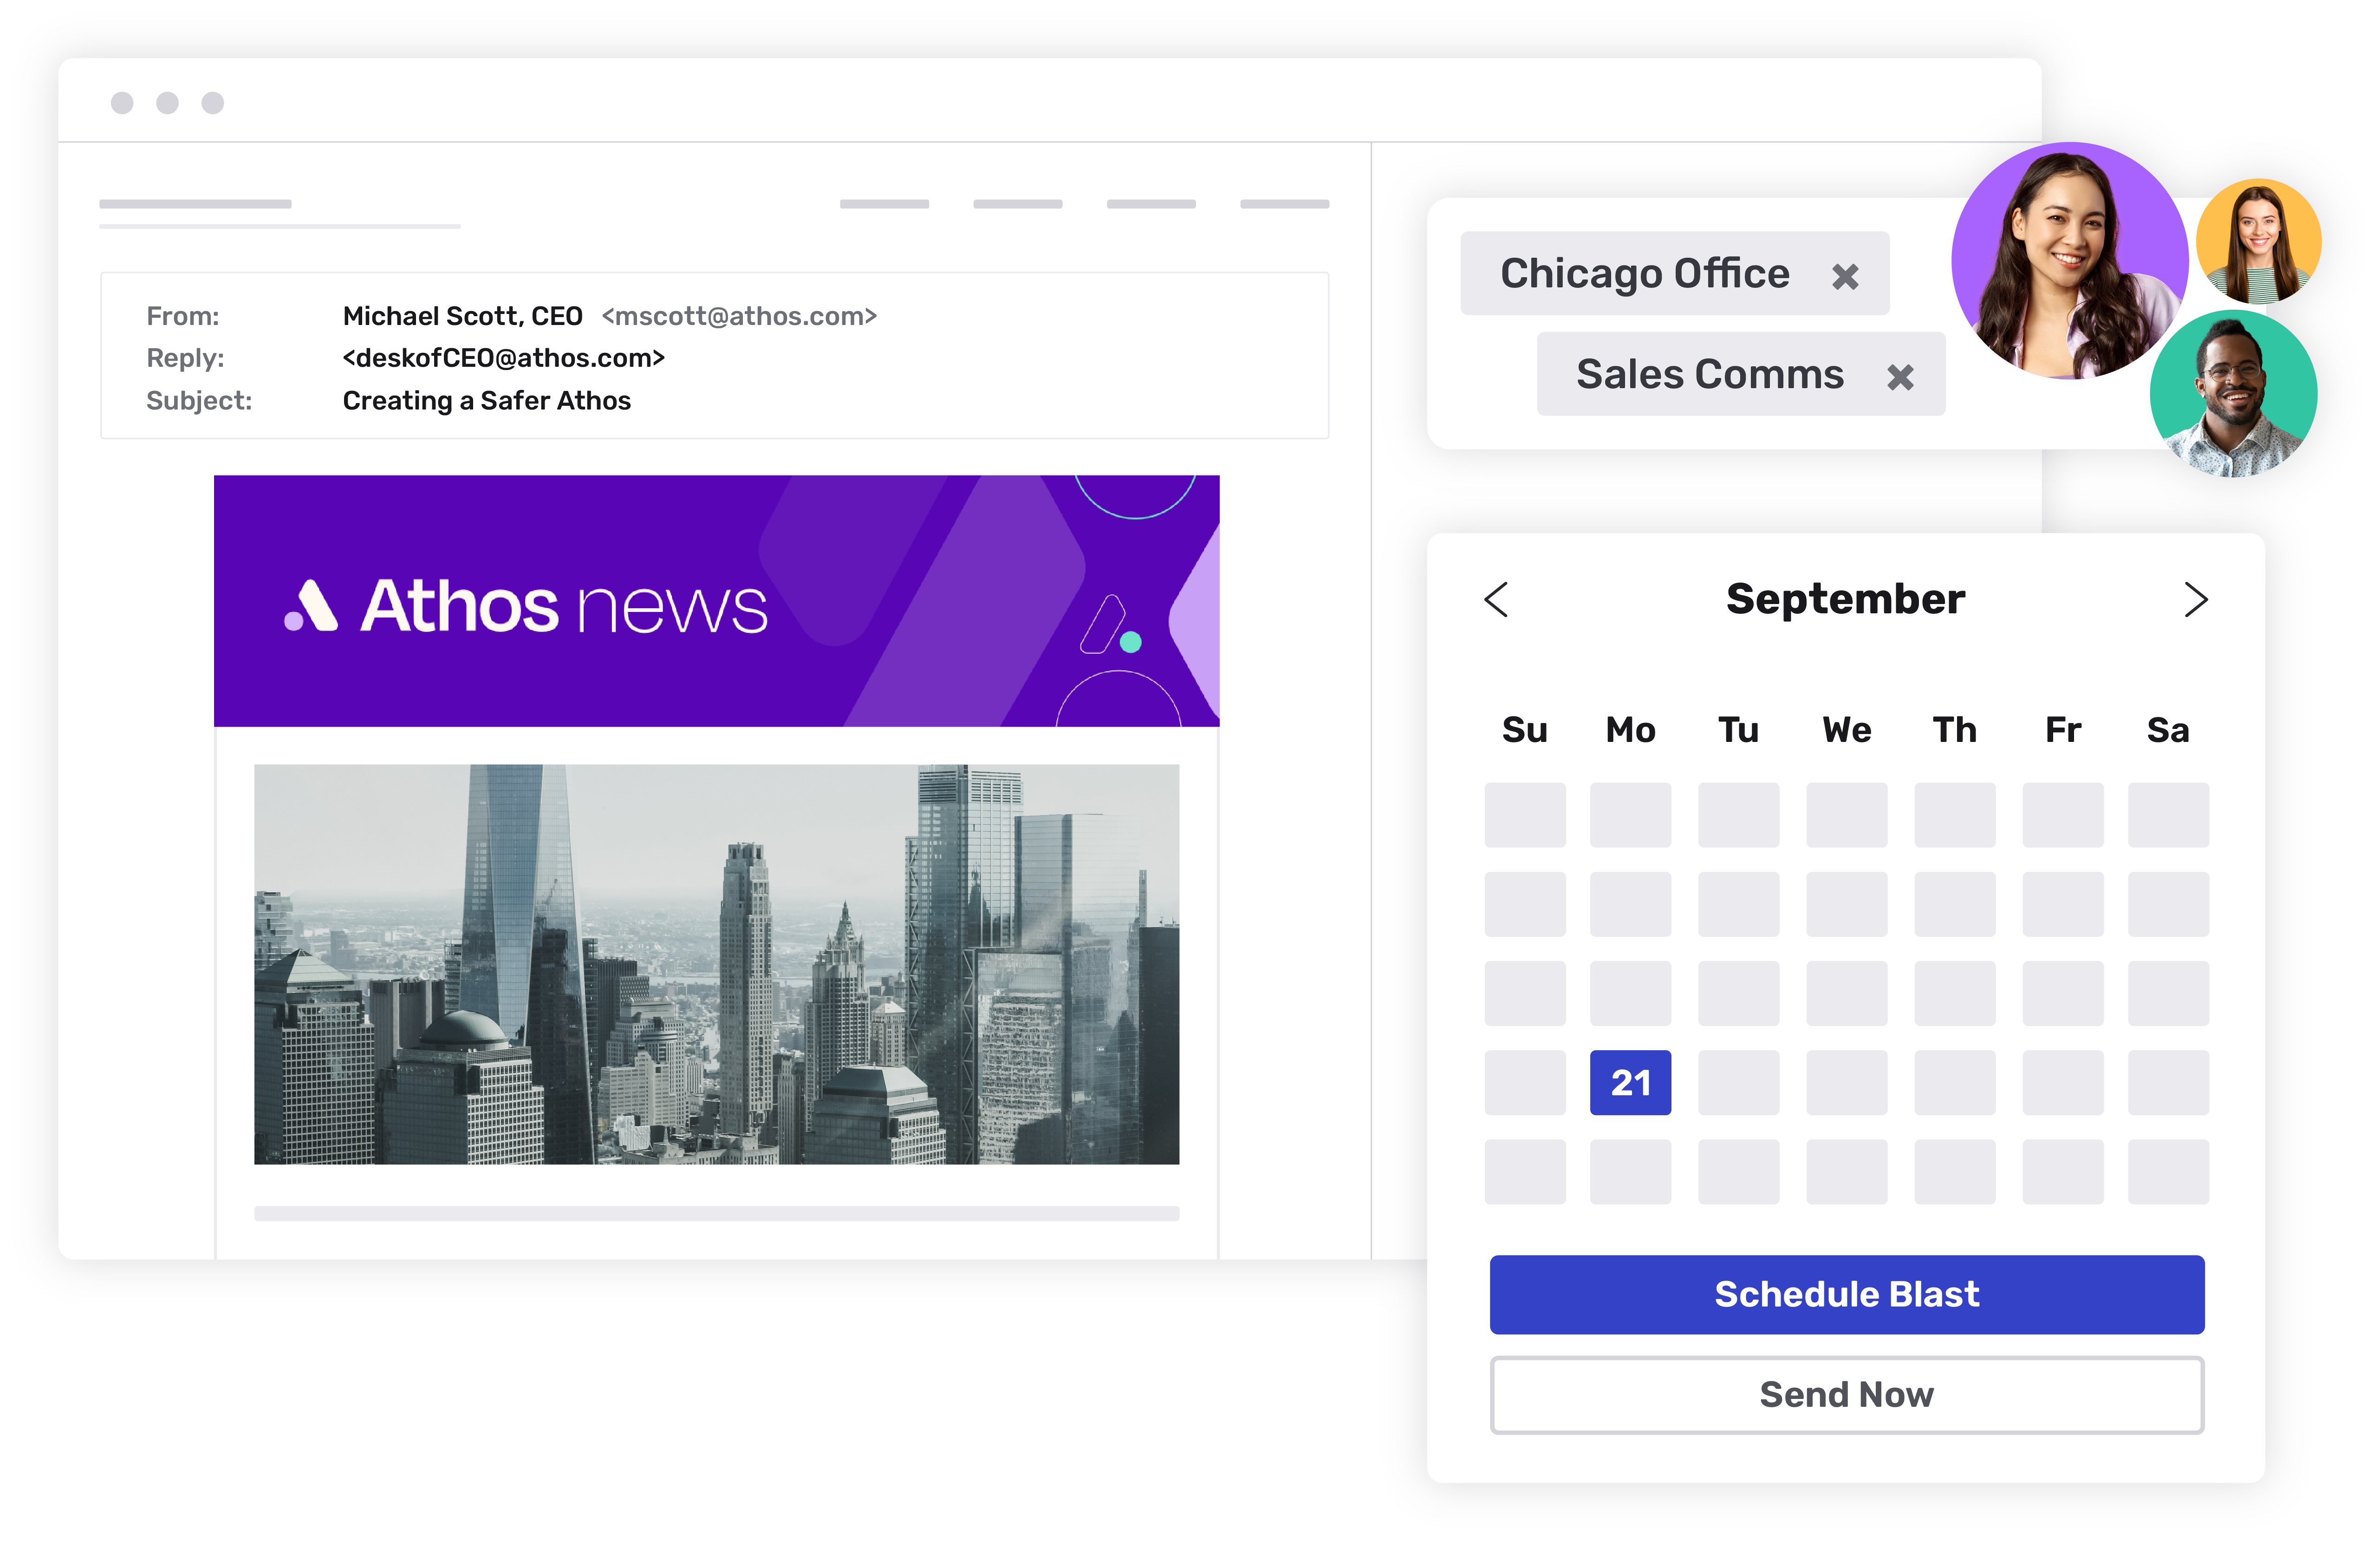 Athos corporate news email is being scheduled for the Chicago and Sales Communications segments